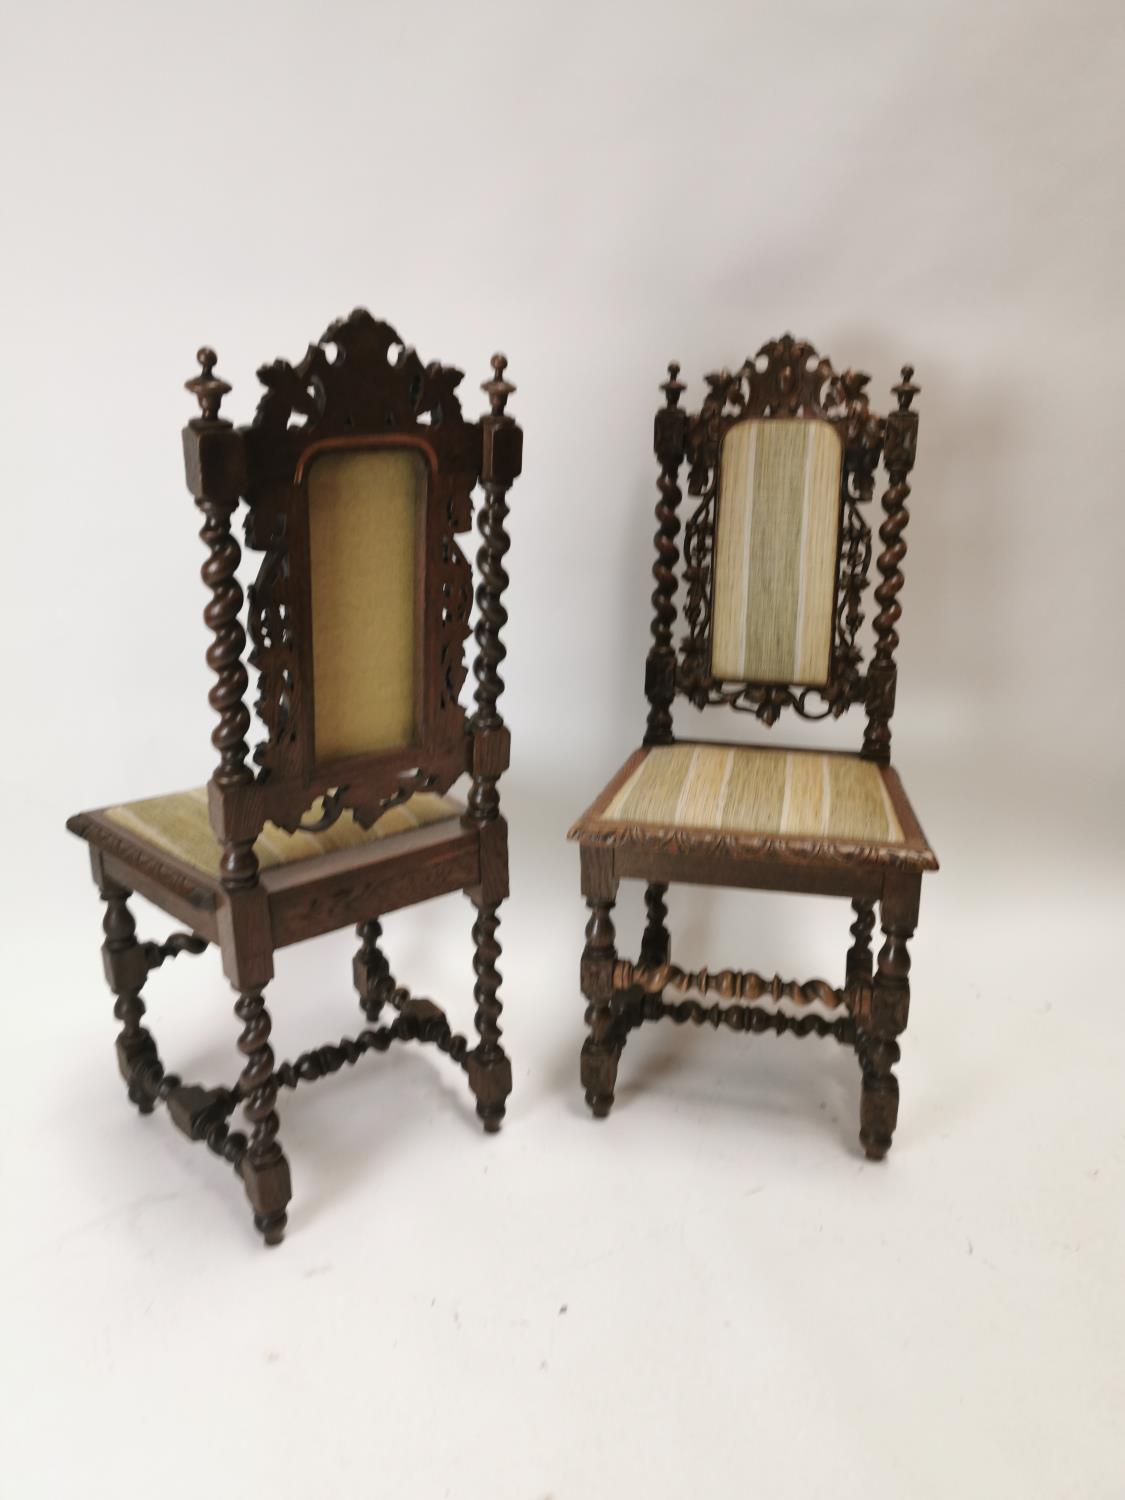 19th. C. upholstered carved oak hall chairs decorated with vines. {108 cm H x 48 cm W x 43 cm D}. - Image 3 of 3